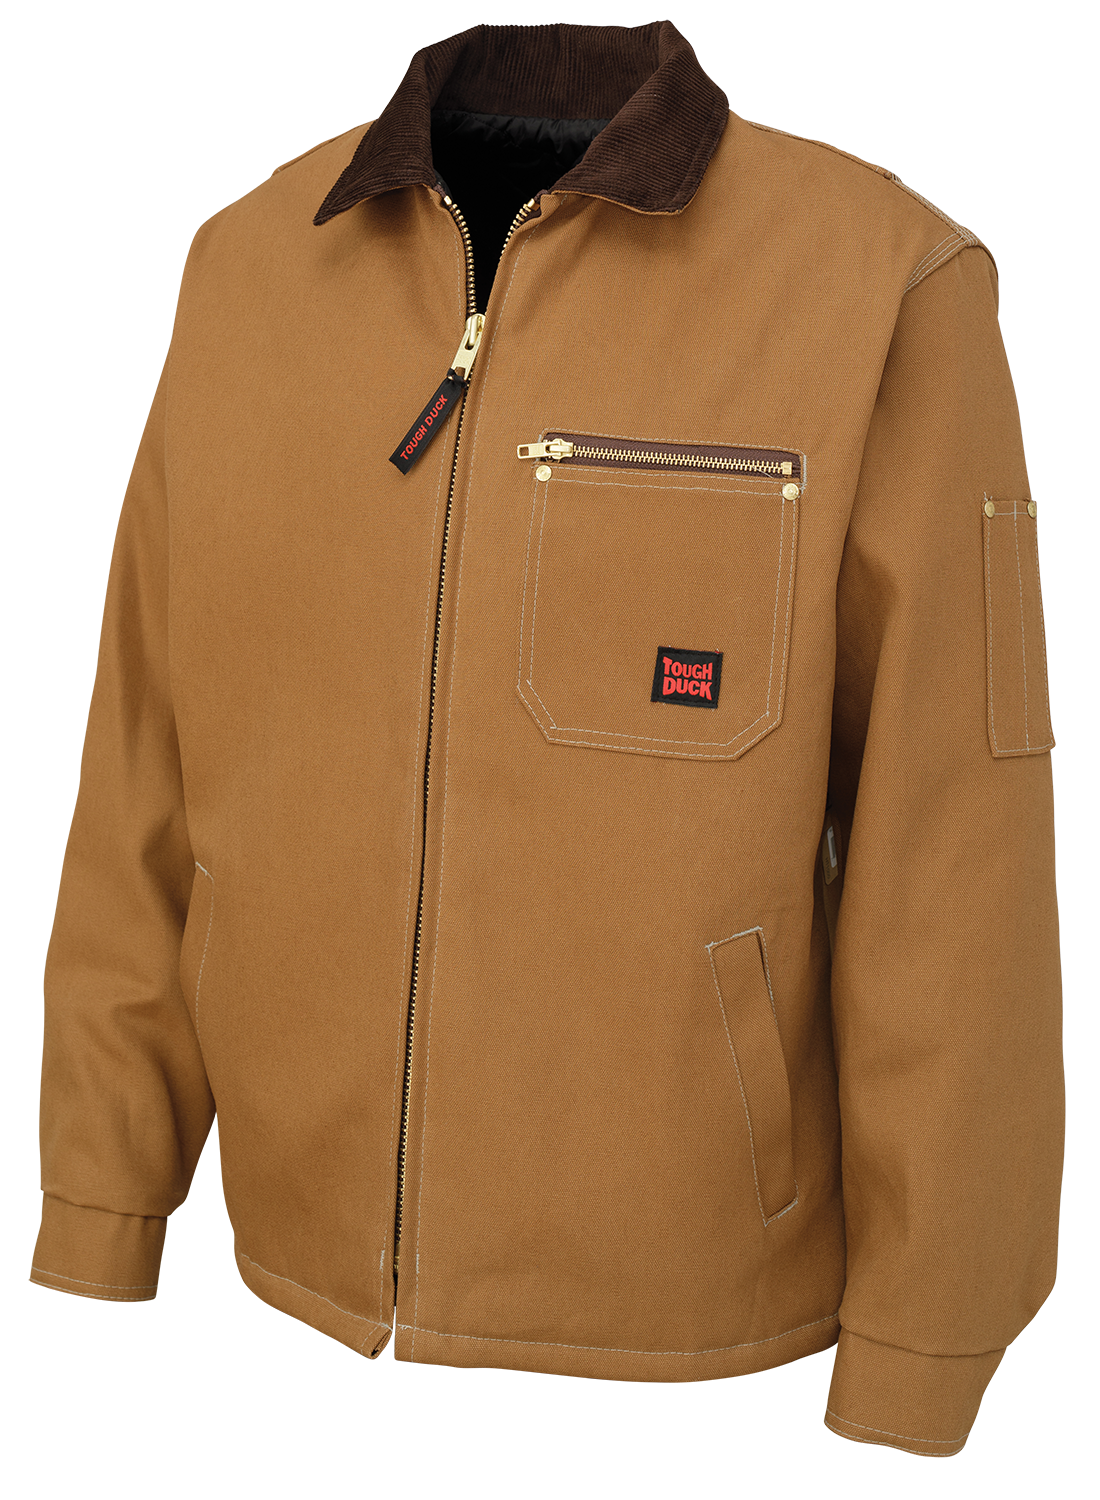 Tough Duck Workwear: Building Tough Gear for 80 Years - Full Source Blog